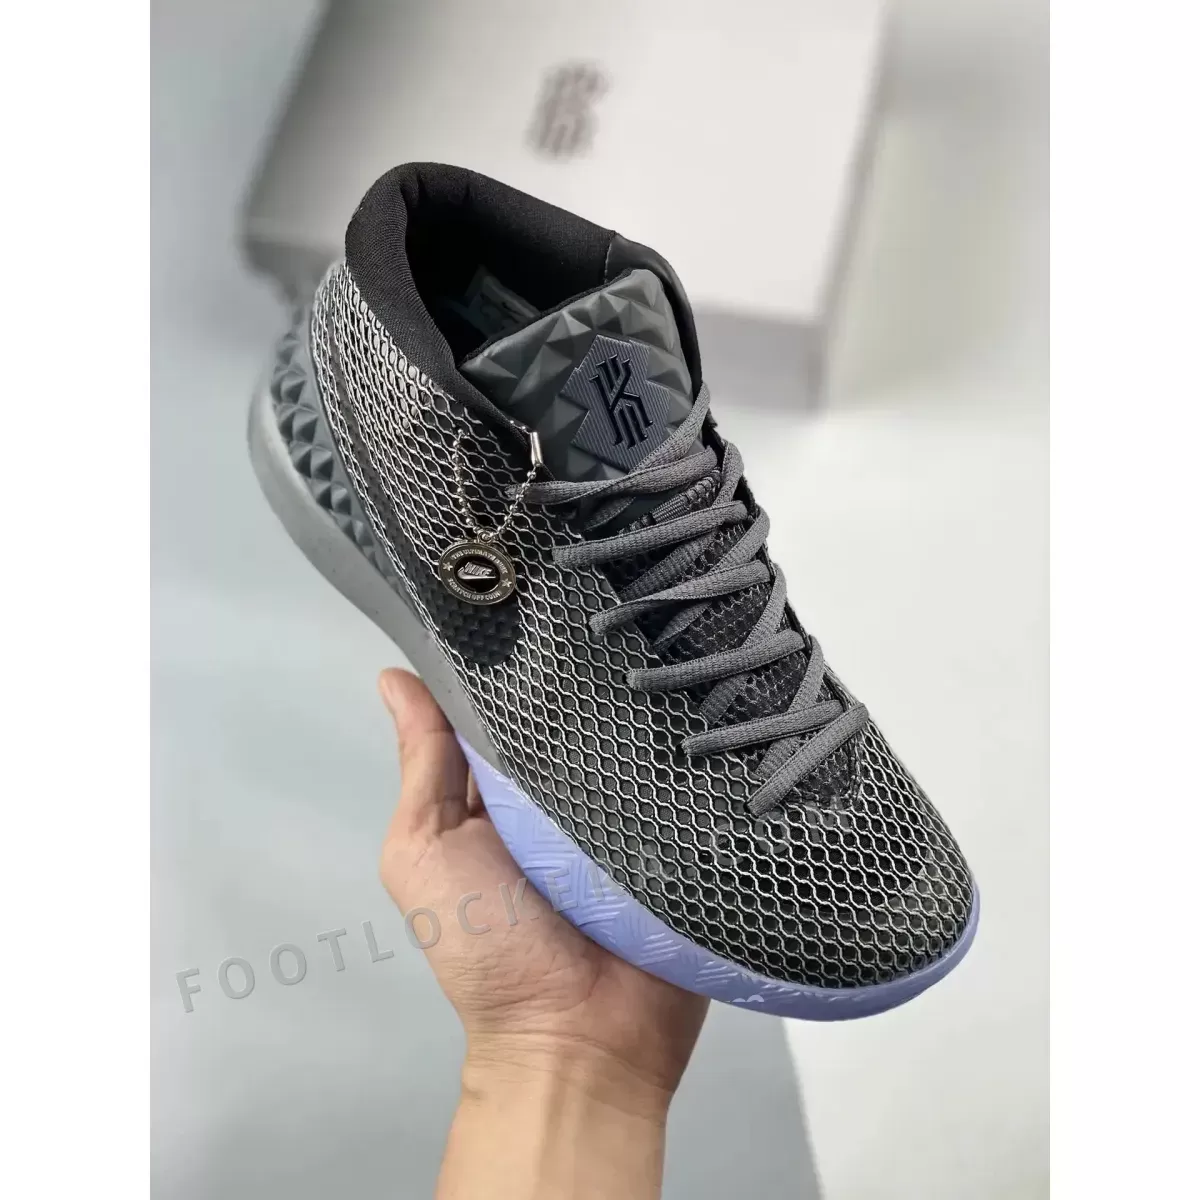 Kyrie Irving Shoes All Star, Nike Kyrie 1 AS Grey 742547-090